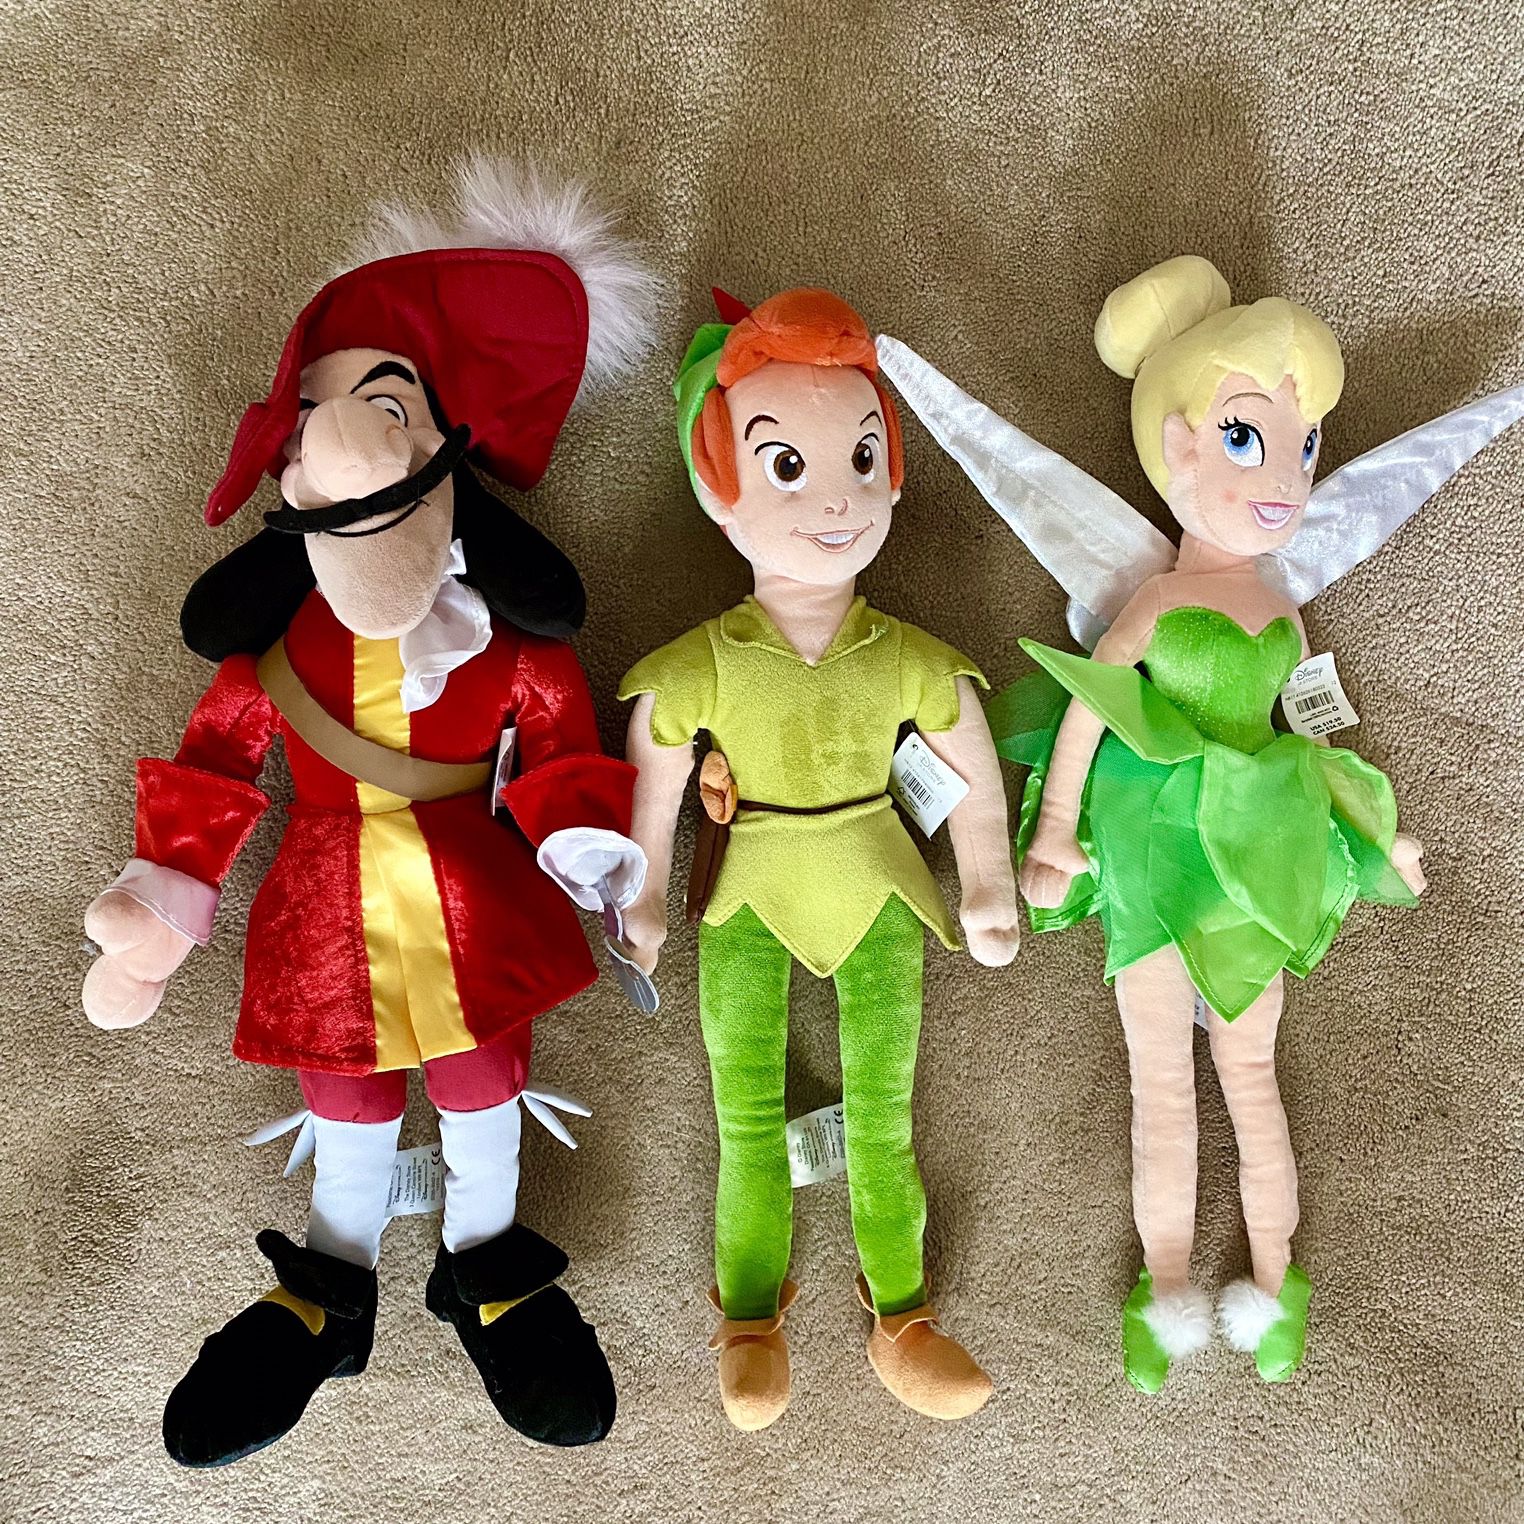 Title “Disney Peter Pan, Tinkerbell, Captain Hook Plush - Lot of 3 (new,  with tags) for Sale in North Wales, PA - OfferUp